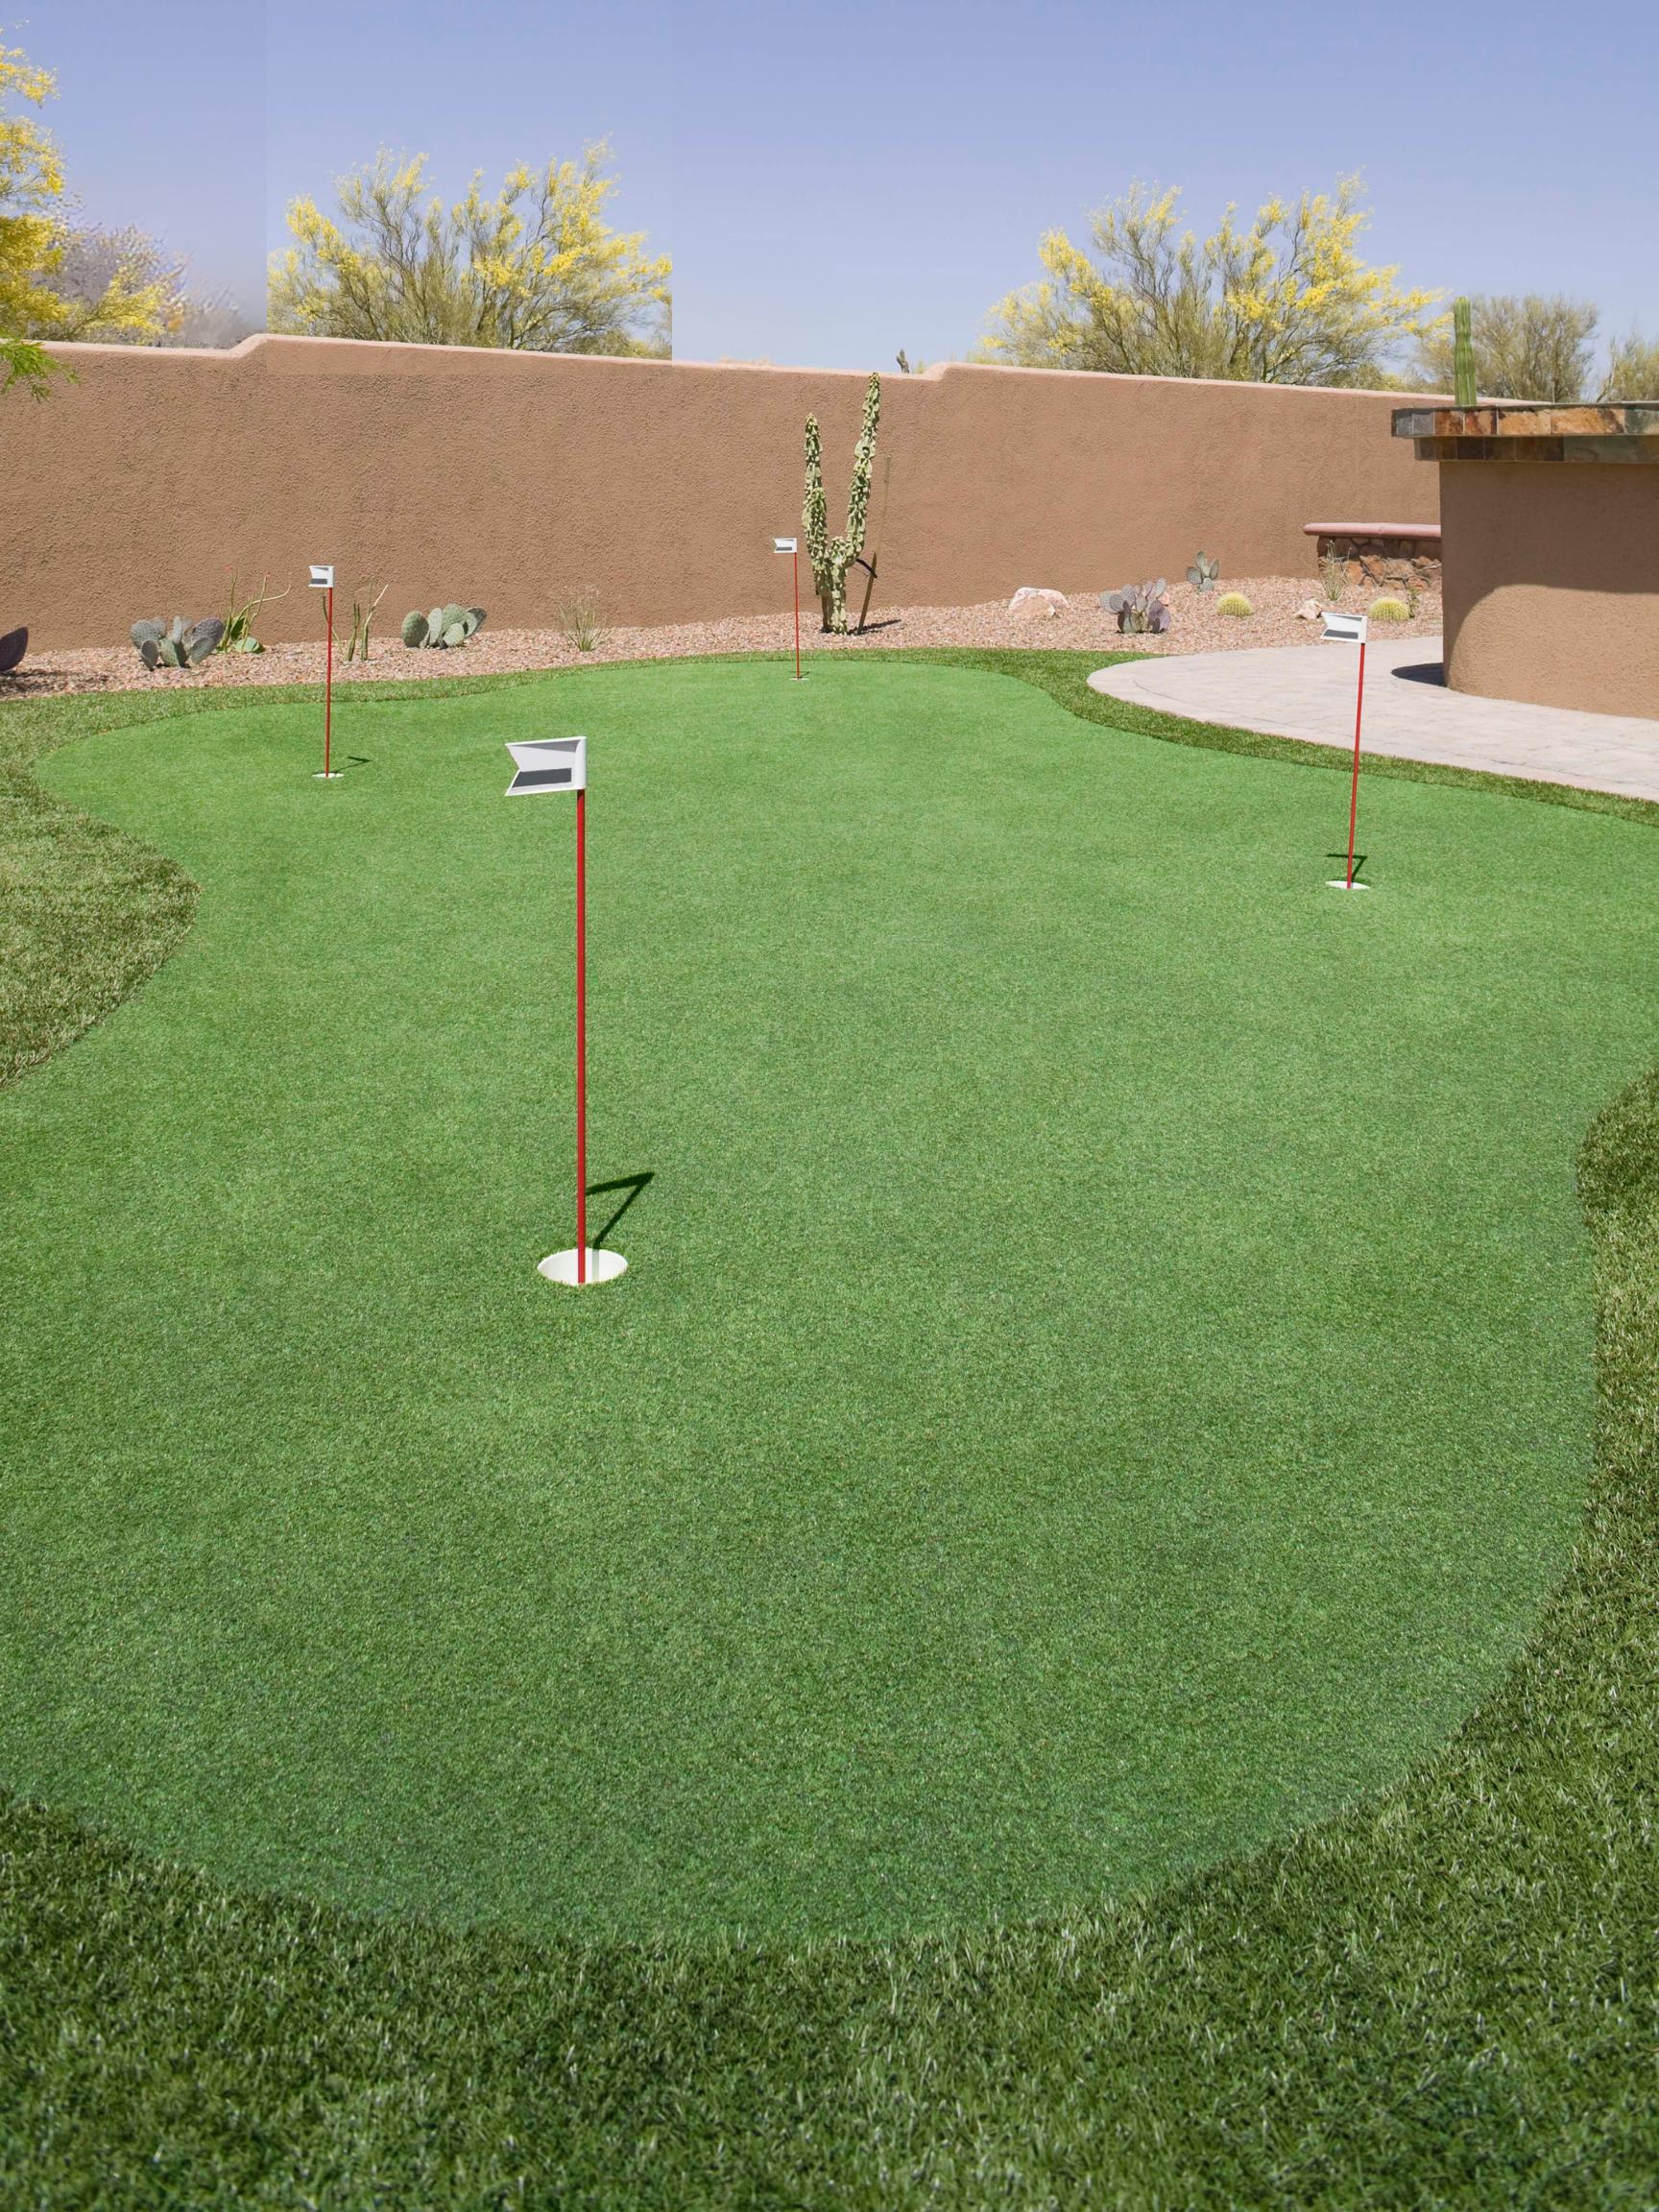 Transform Your Backyard into a Golfer’s Haven